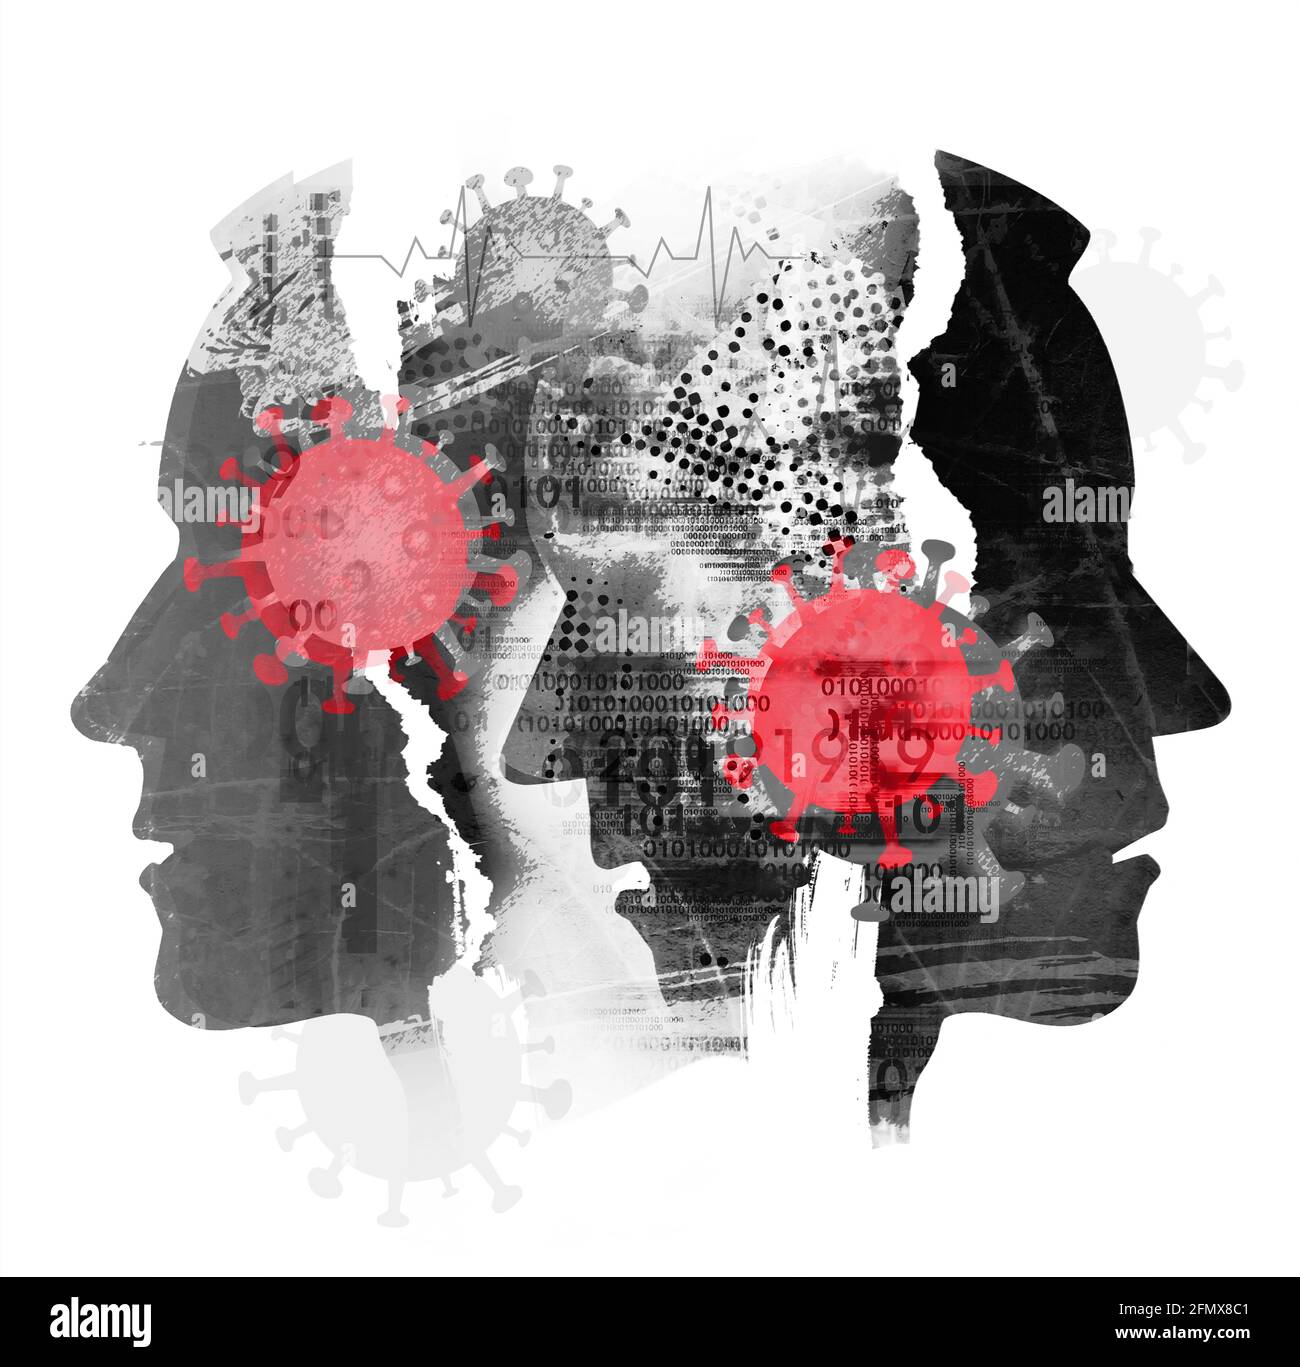 Coronavirus, human tragedy, traumatized sick people. Stylized male heads, composition of silhouettes shown in profile. Expressive Illustration. Stock Photo